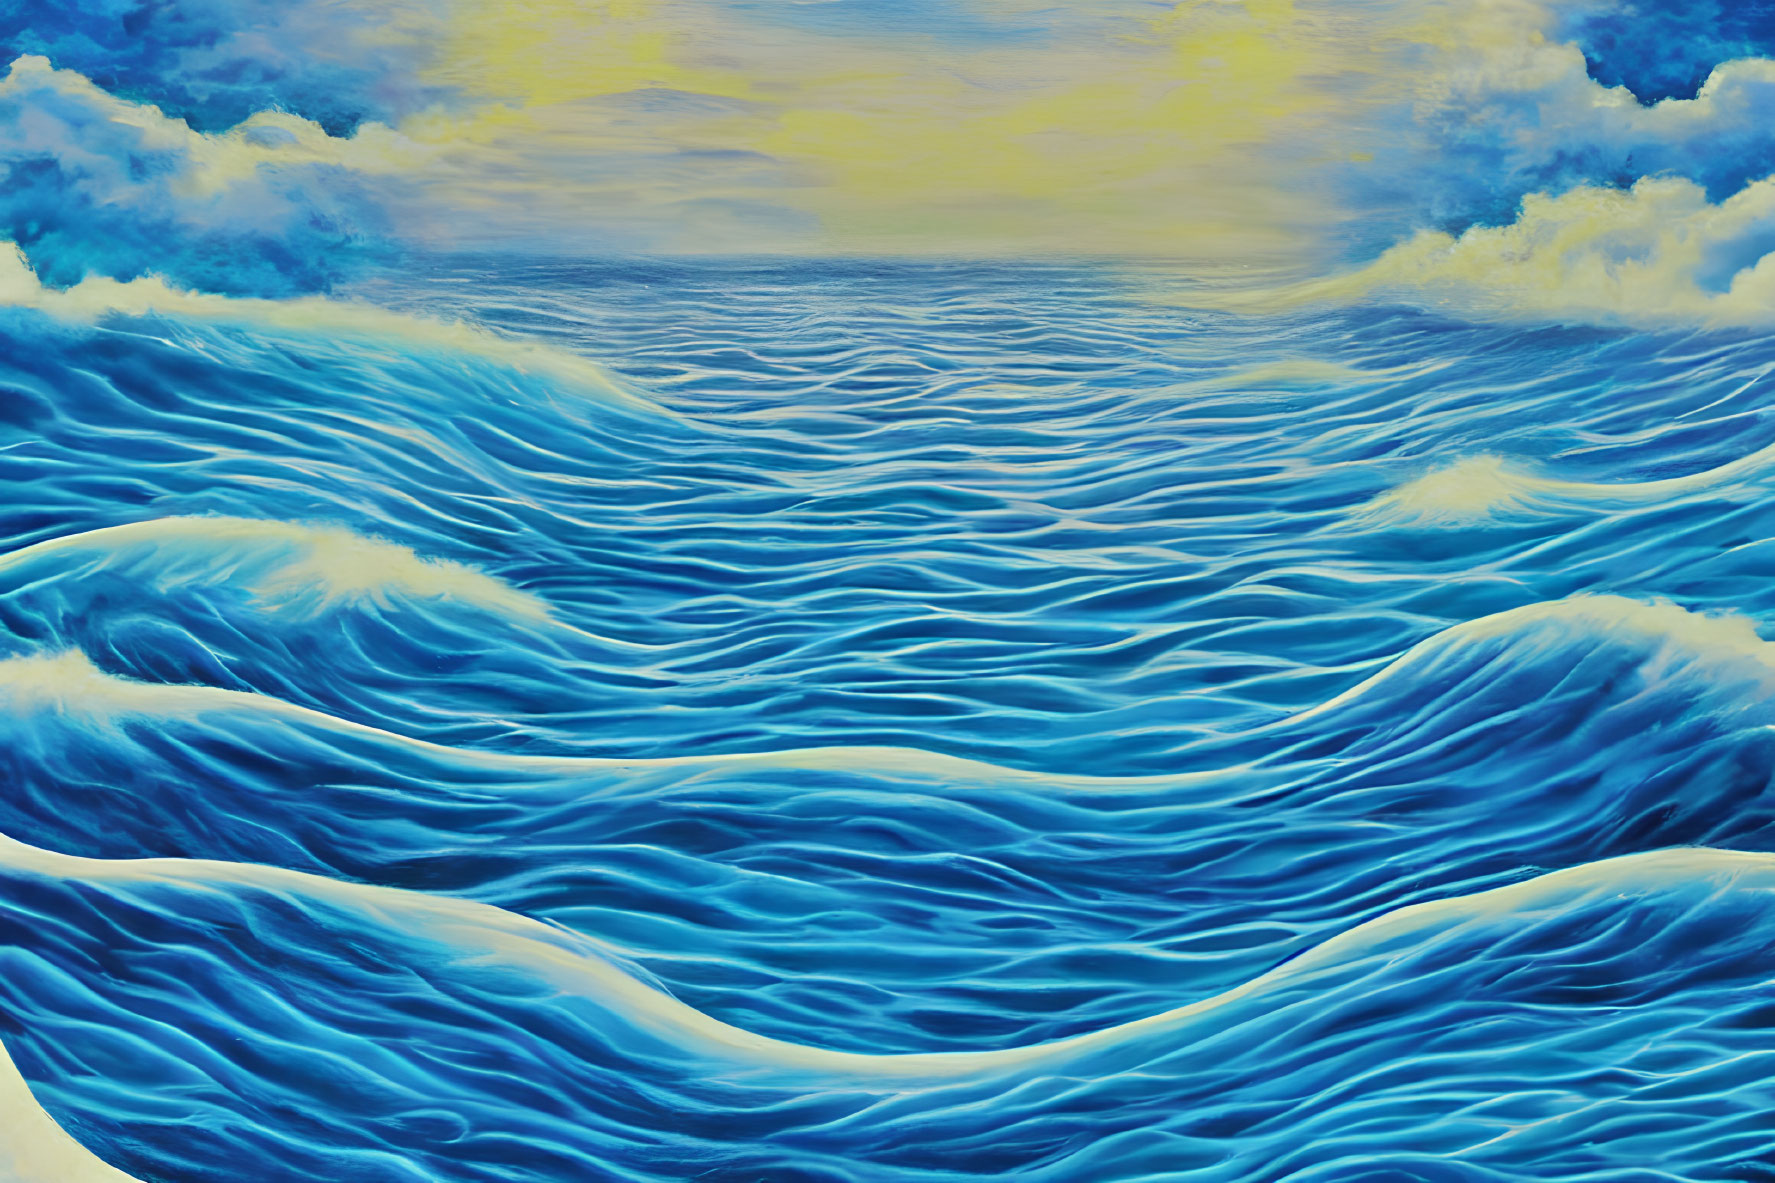 Blue sea with dynamic waves under a sky transitioning to warm yellow glow